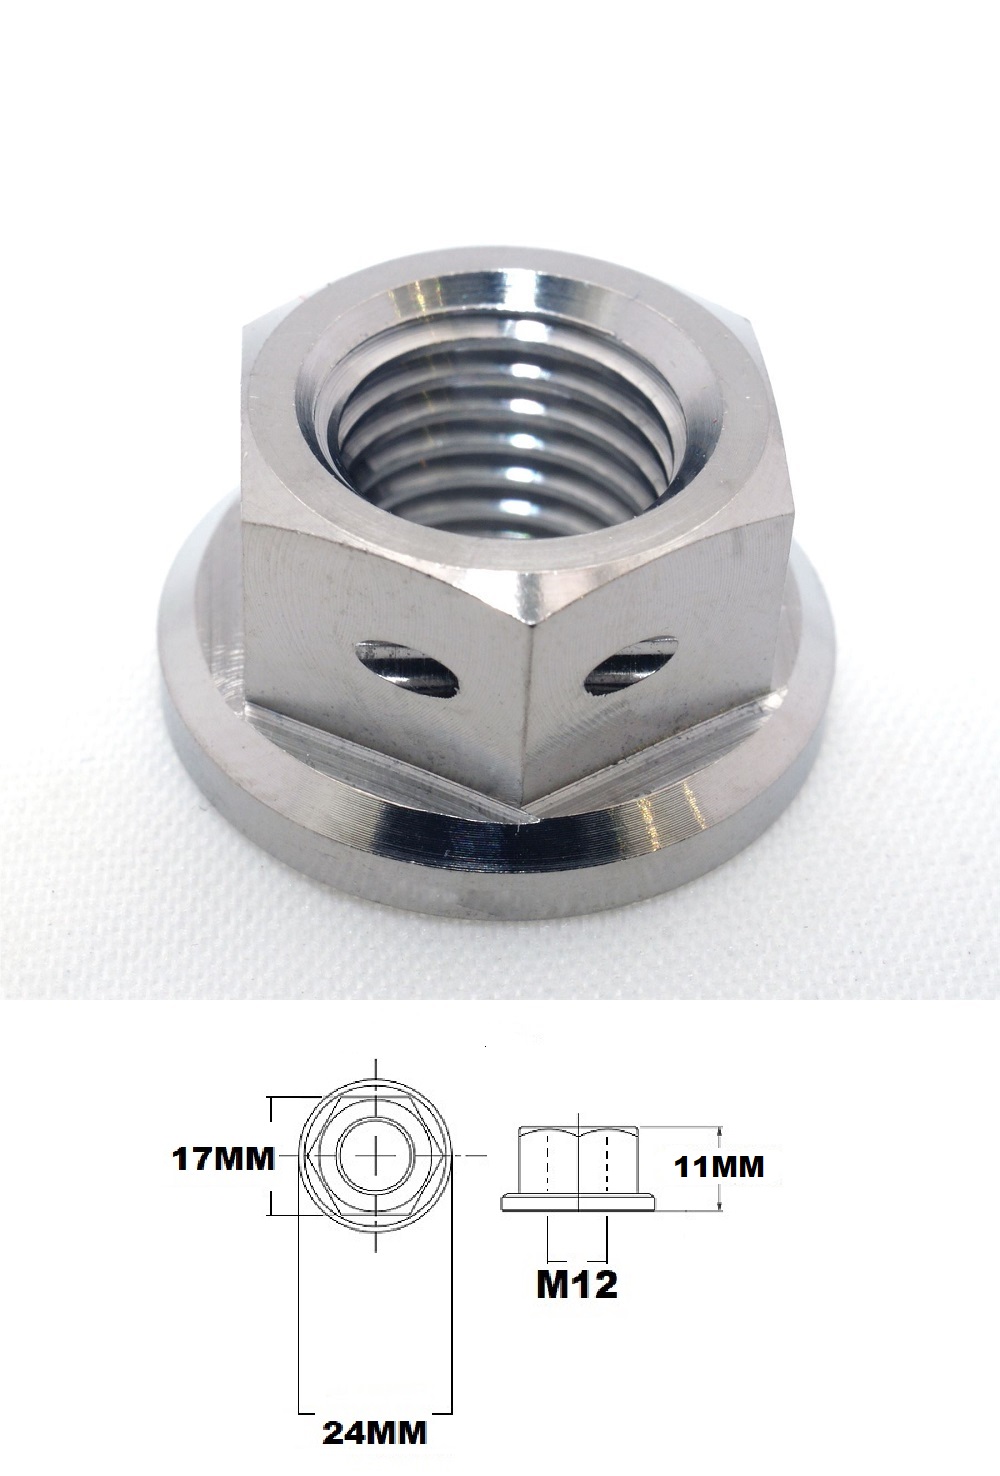 M12X1.25 THREAD TITANIUM RACE DRILLED FOR WIRE LOCK NUT BETWEEN